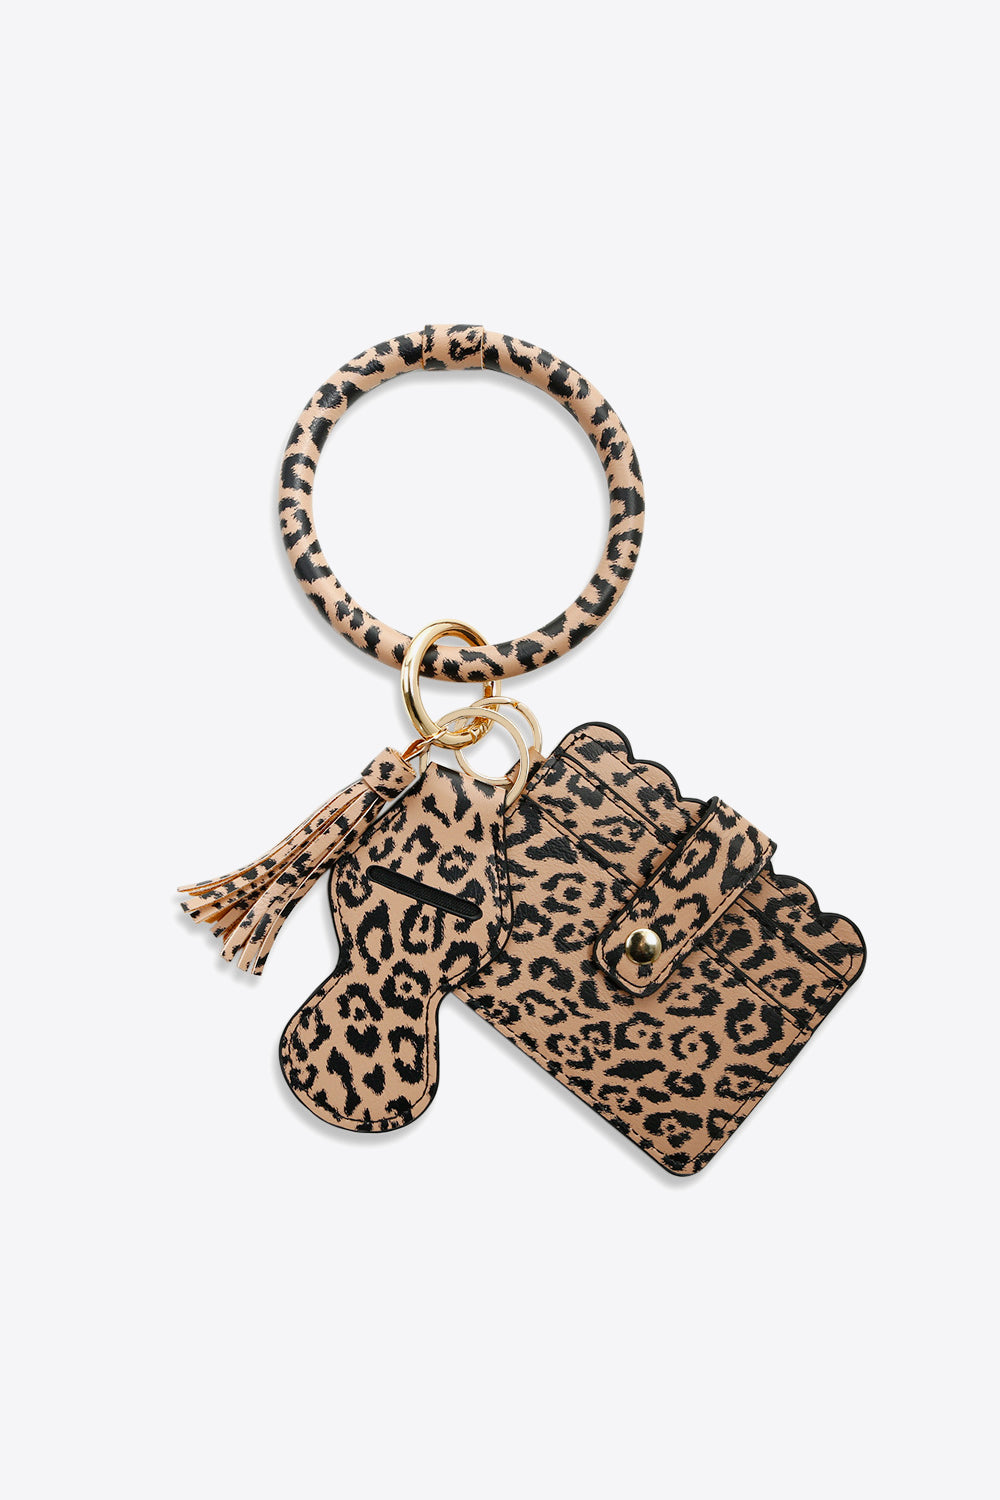 Trendsi Cupid Beauty Supplies Leopard / One Size Keychains PU Wristlet Keychain with Card Holder